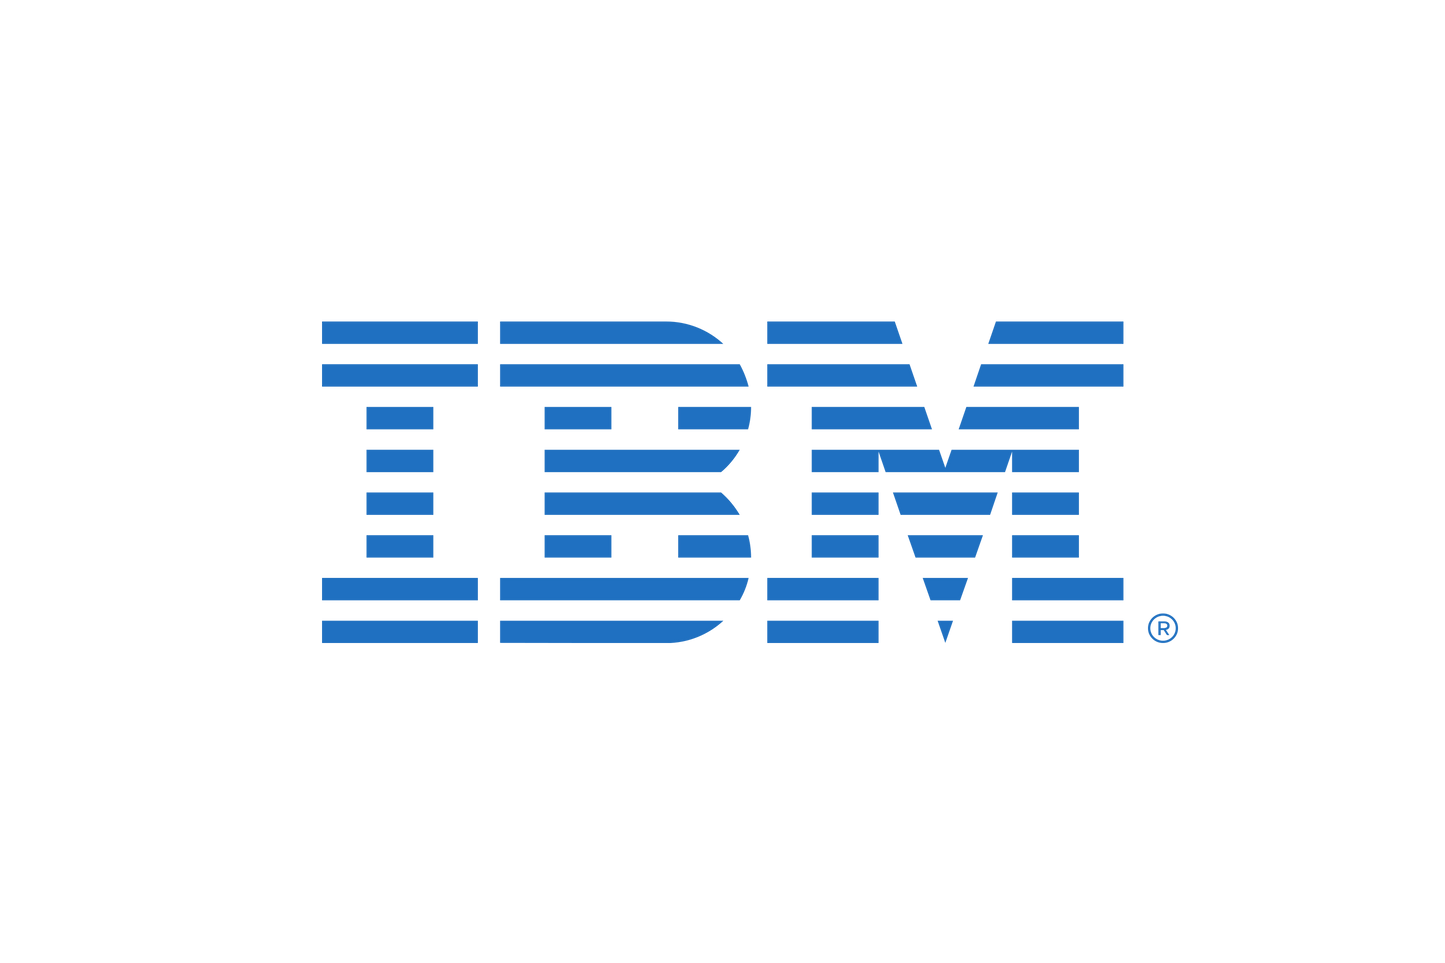 IBM Planning Analytics Express Connector for TM1 per Install Monthly License